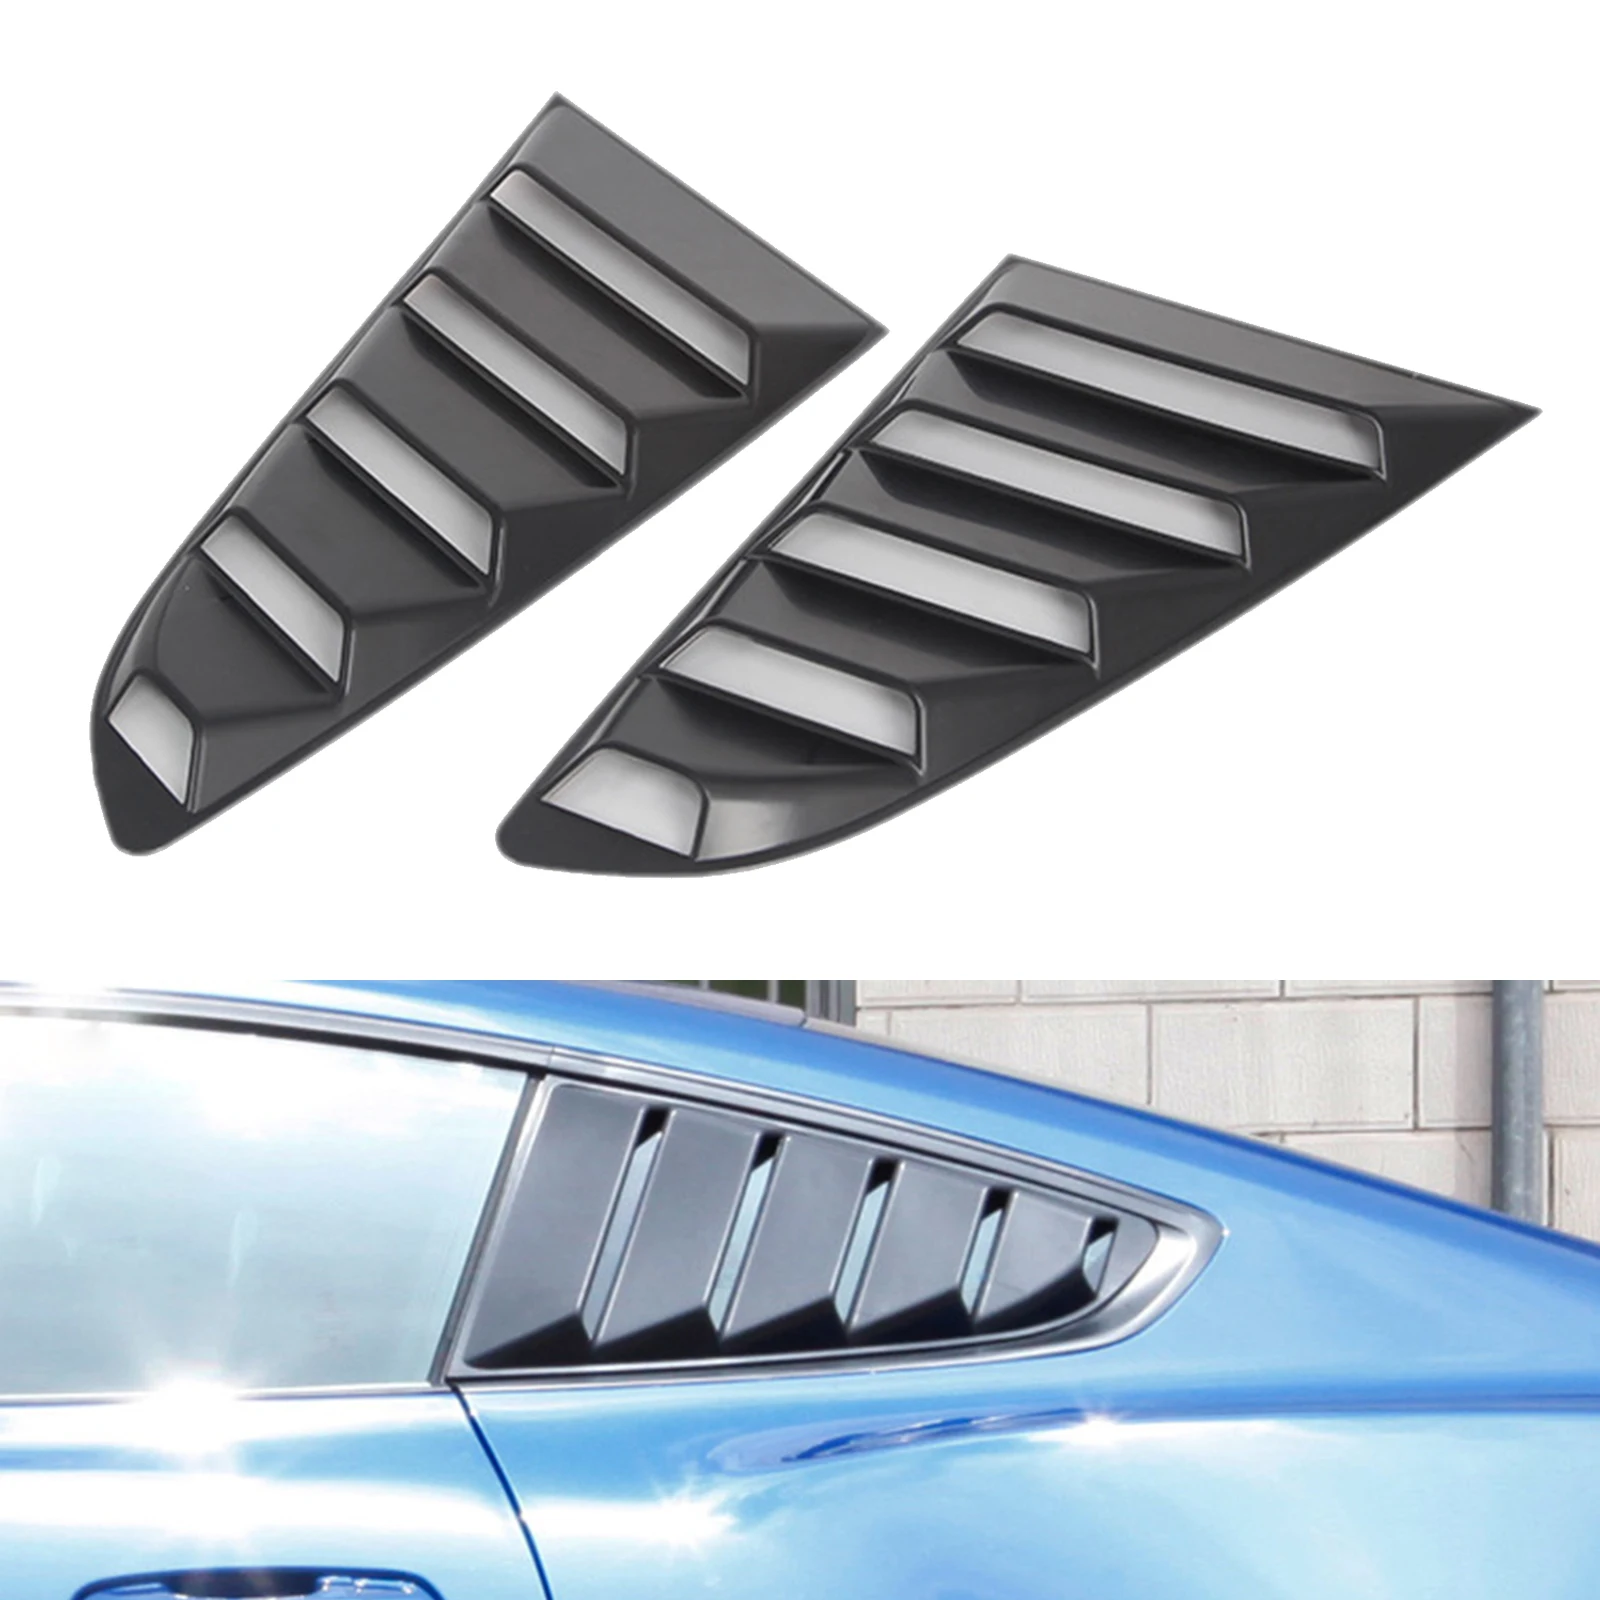 2Pcs Rear Quarter Side Window Louvers Shutter Air Vent Scoop Shades Black Cover for Ford Mustang 2015-Present